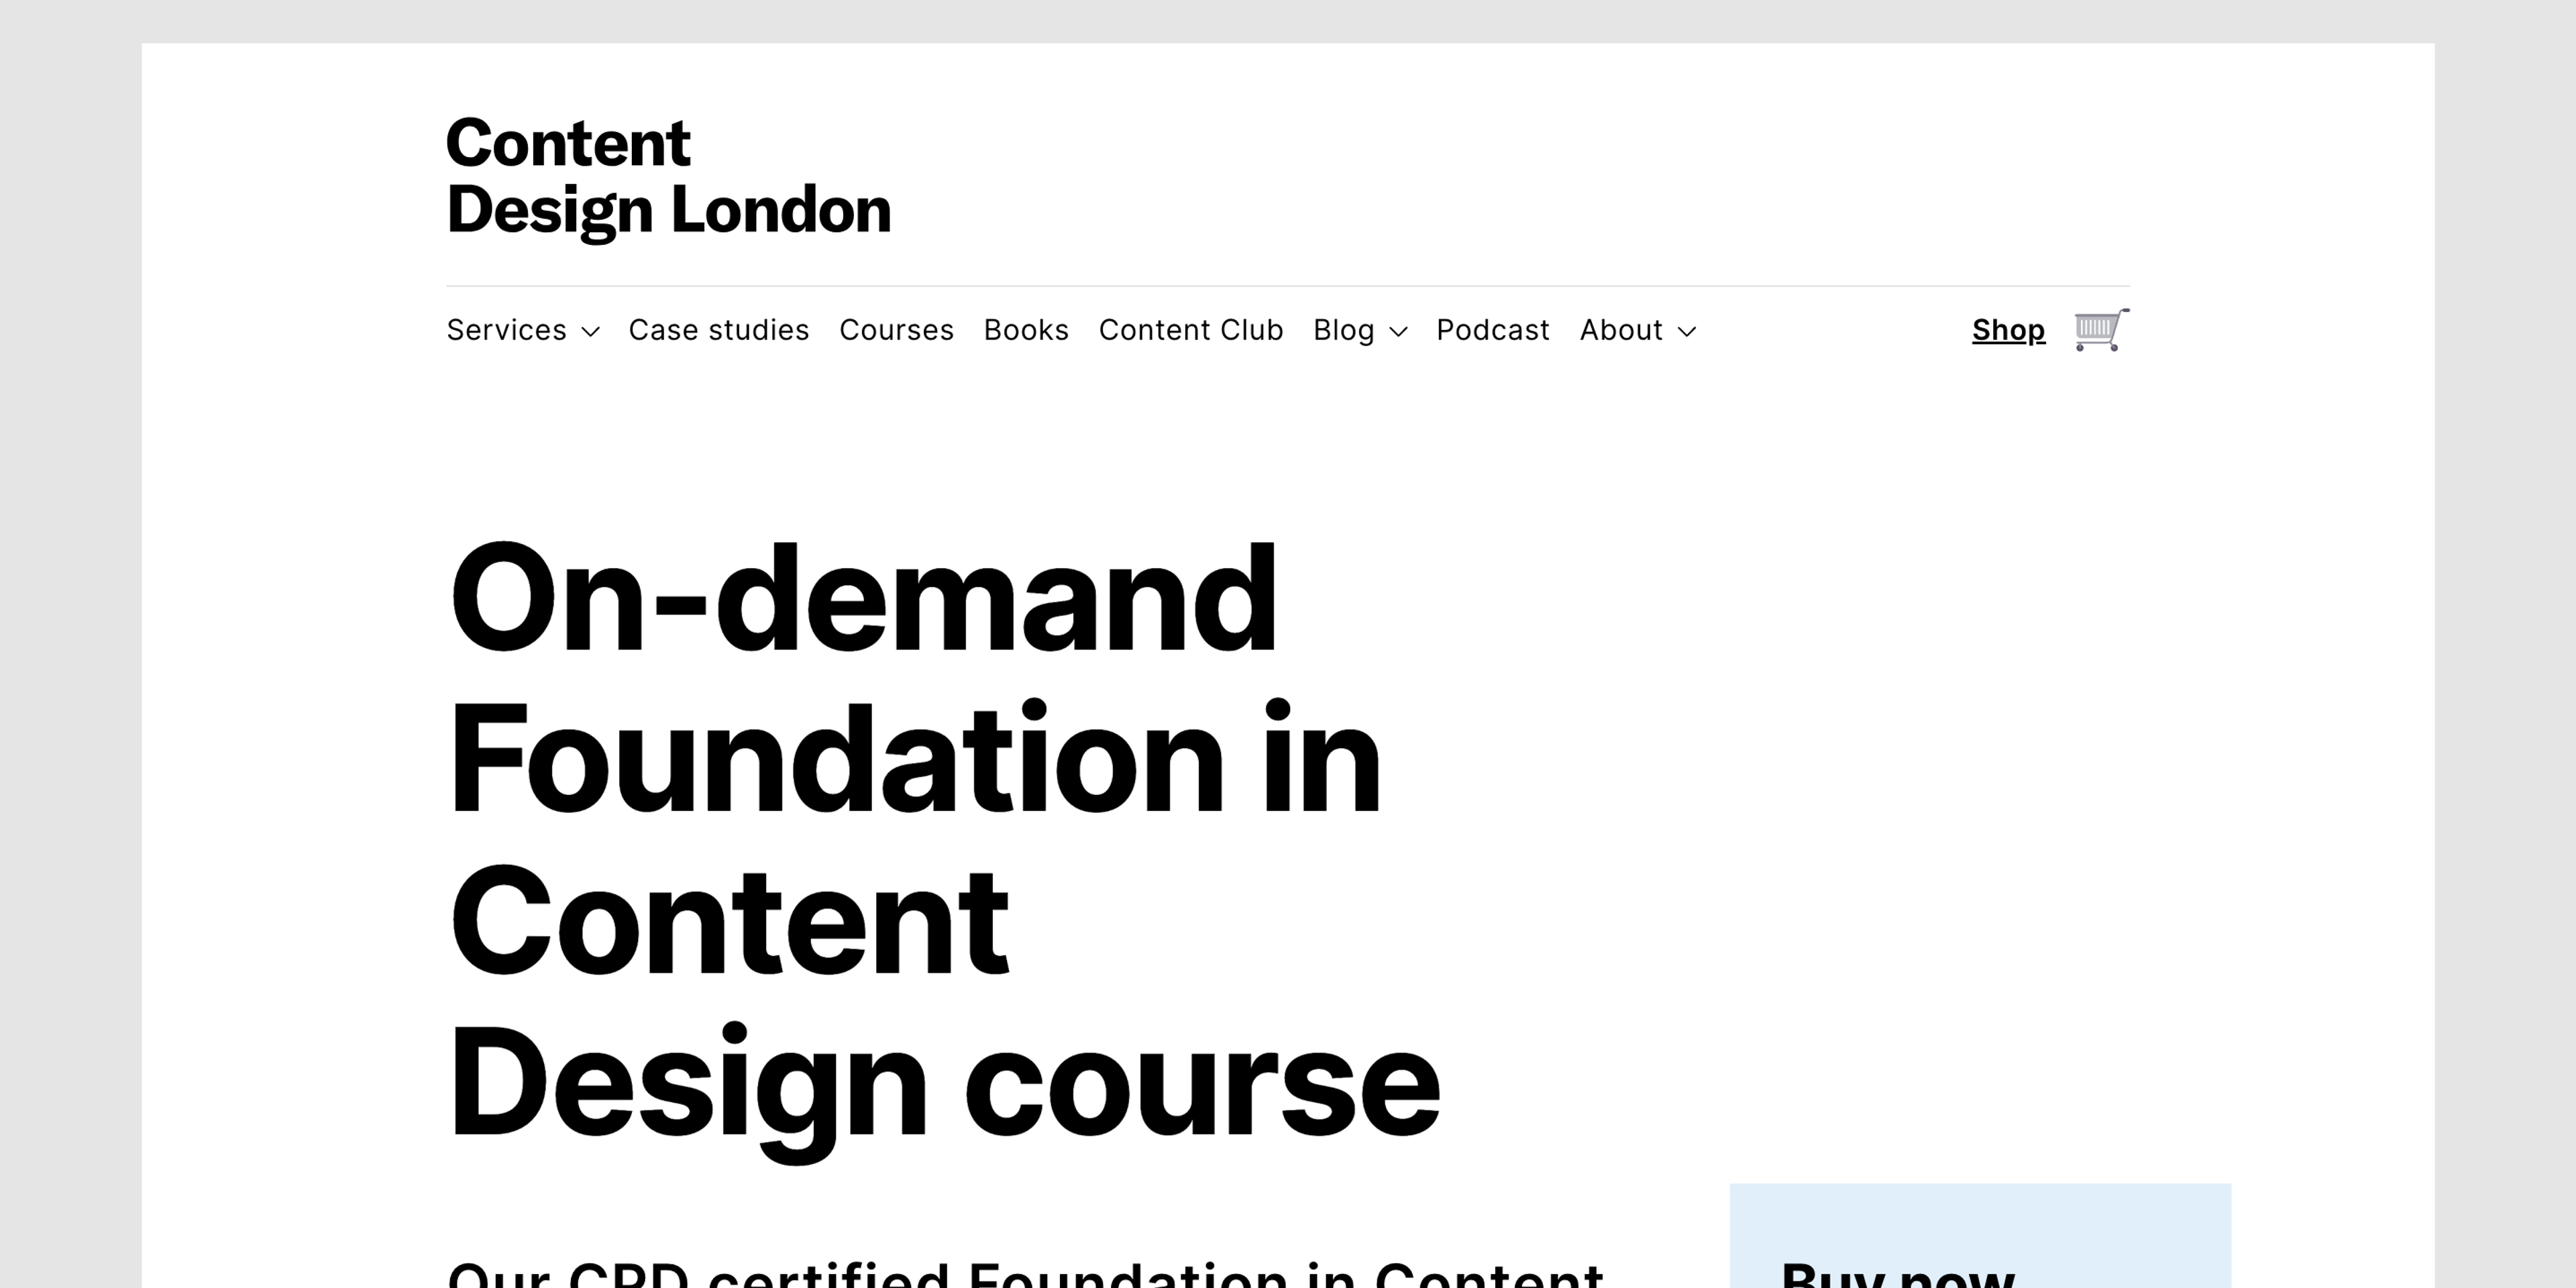 Screenshot of Content Design London with the heading "On-demand Foundation in Content Design course"